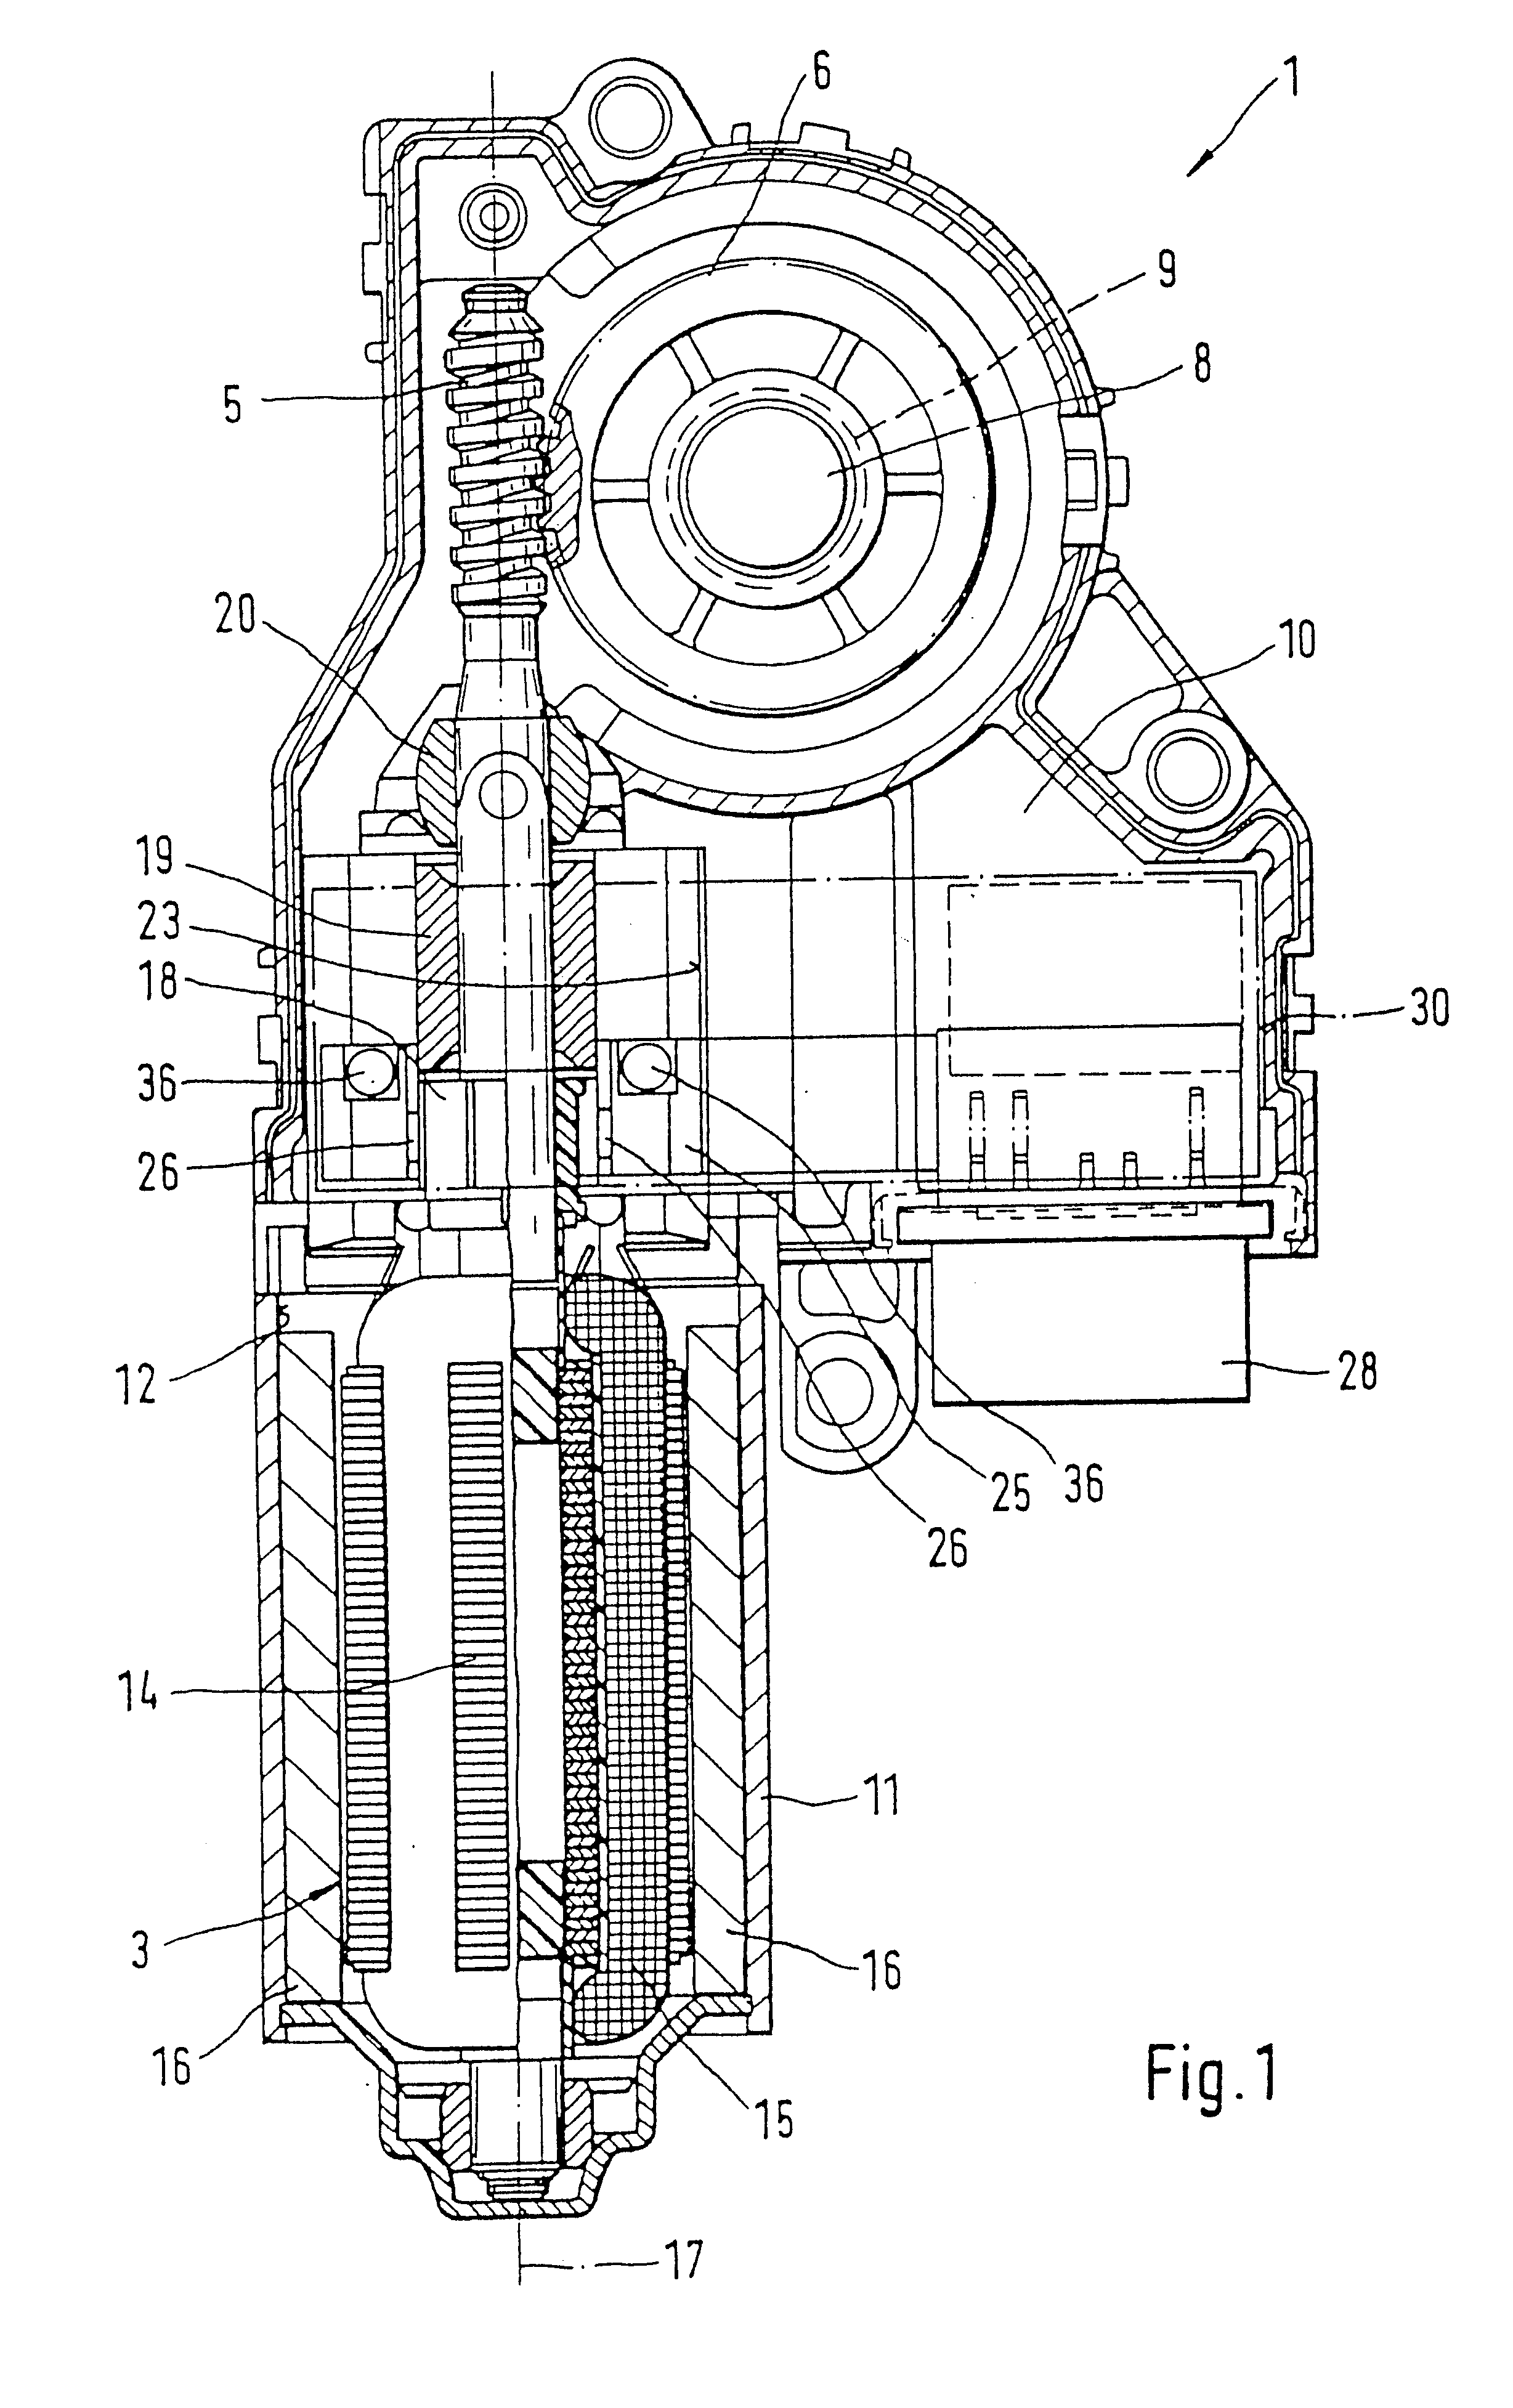 Drive device for moving a sliding sunroof of a vehicle